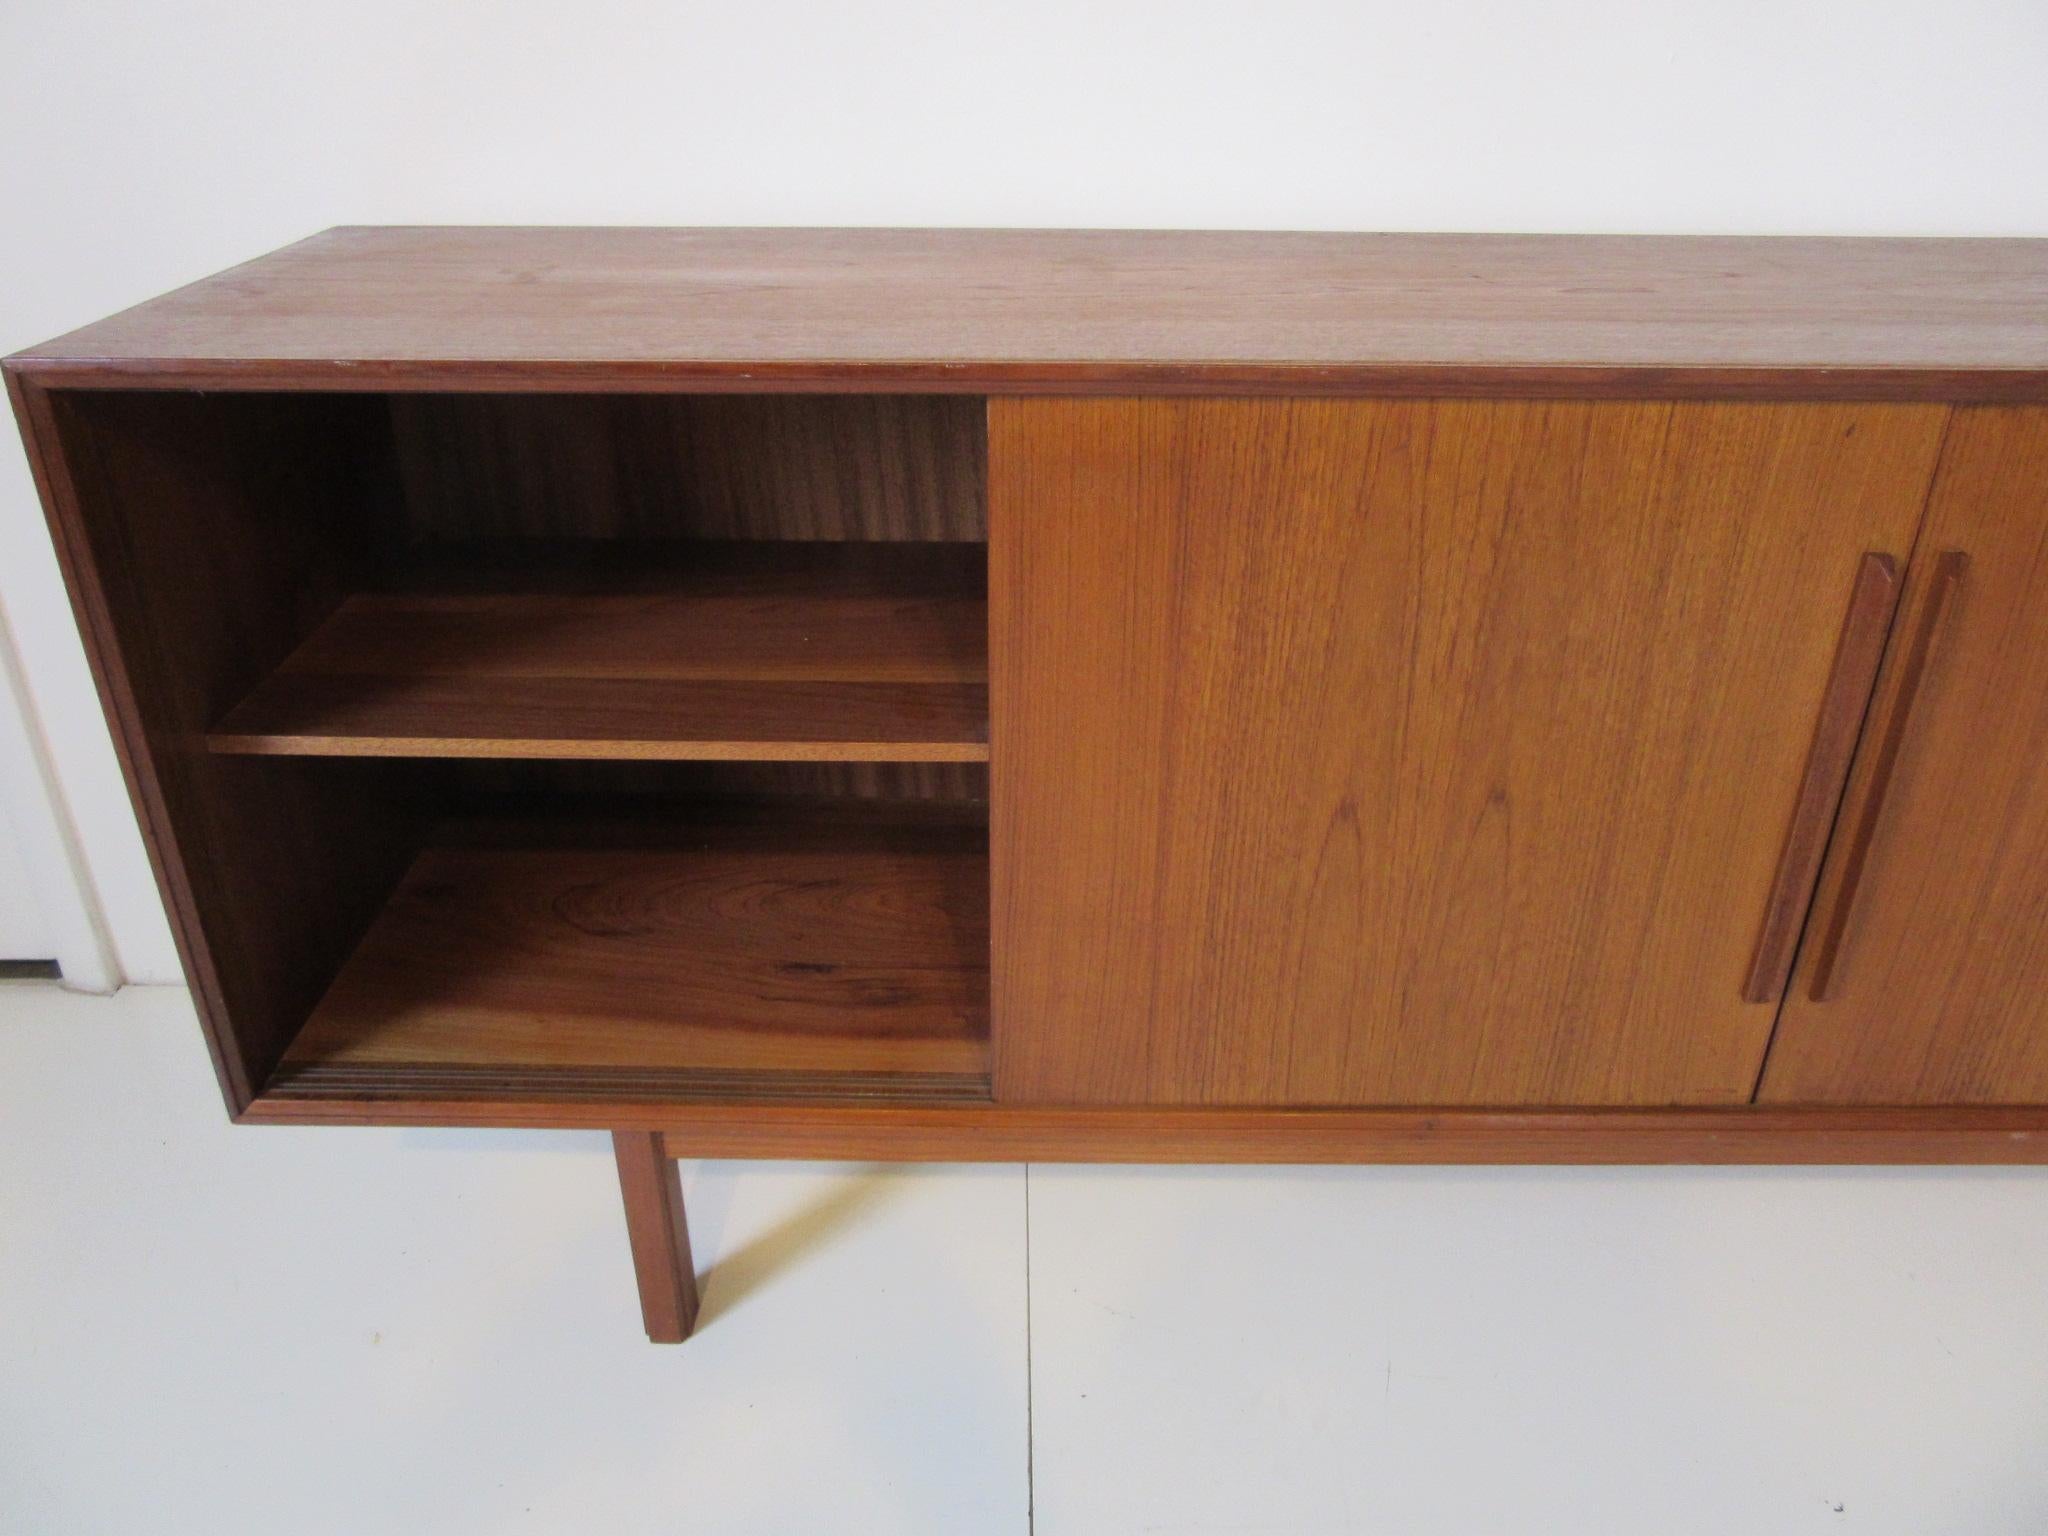 Long Danish Credenza or Sideboard in the style of IB Kofod-Larsen 1